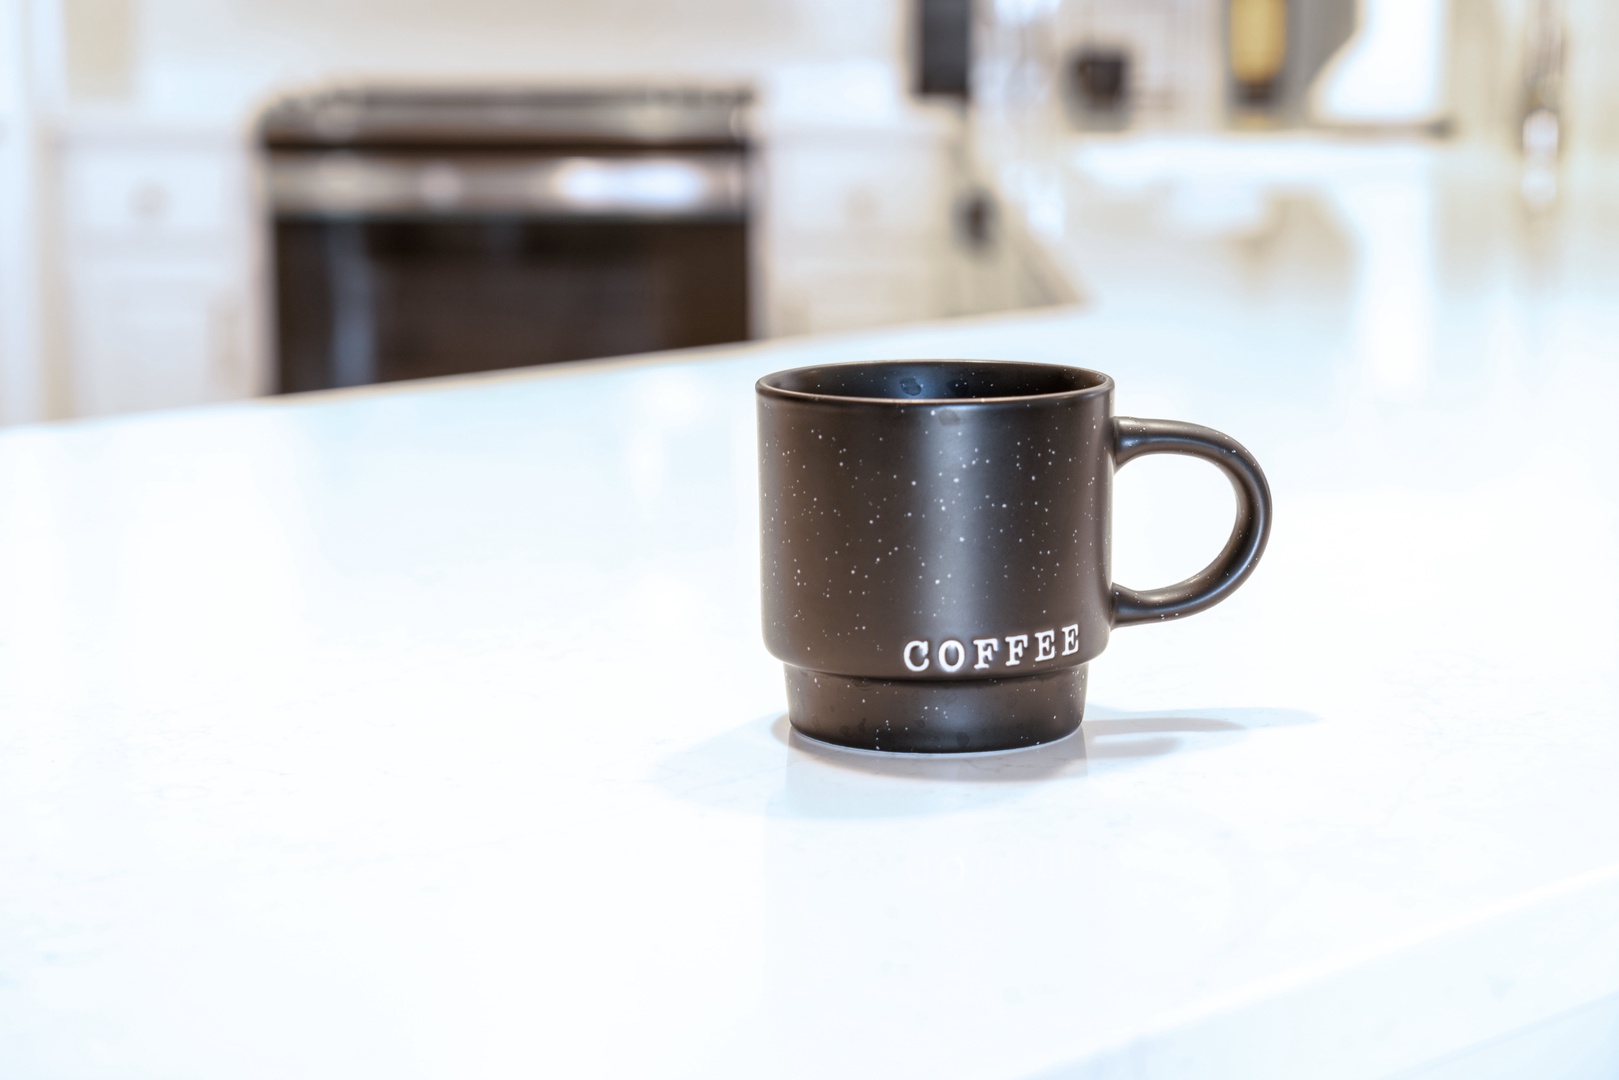 Sip morning coffee or grab a bite at the counter, with seating for 4